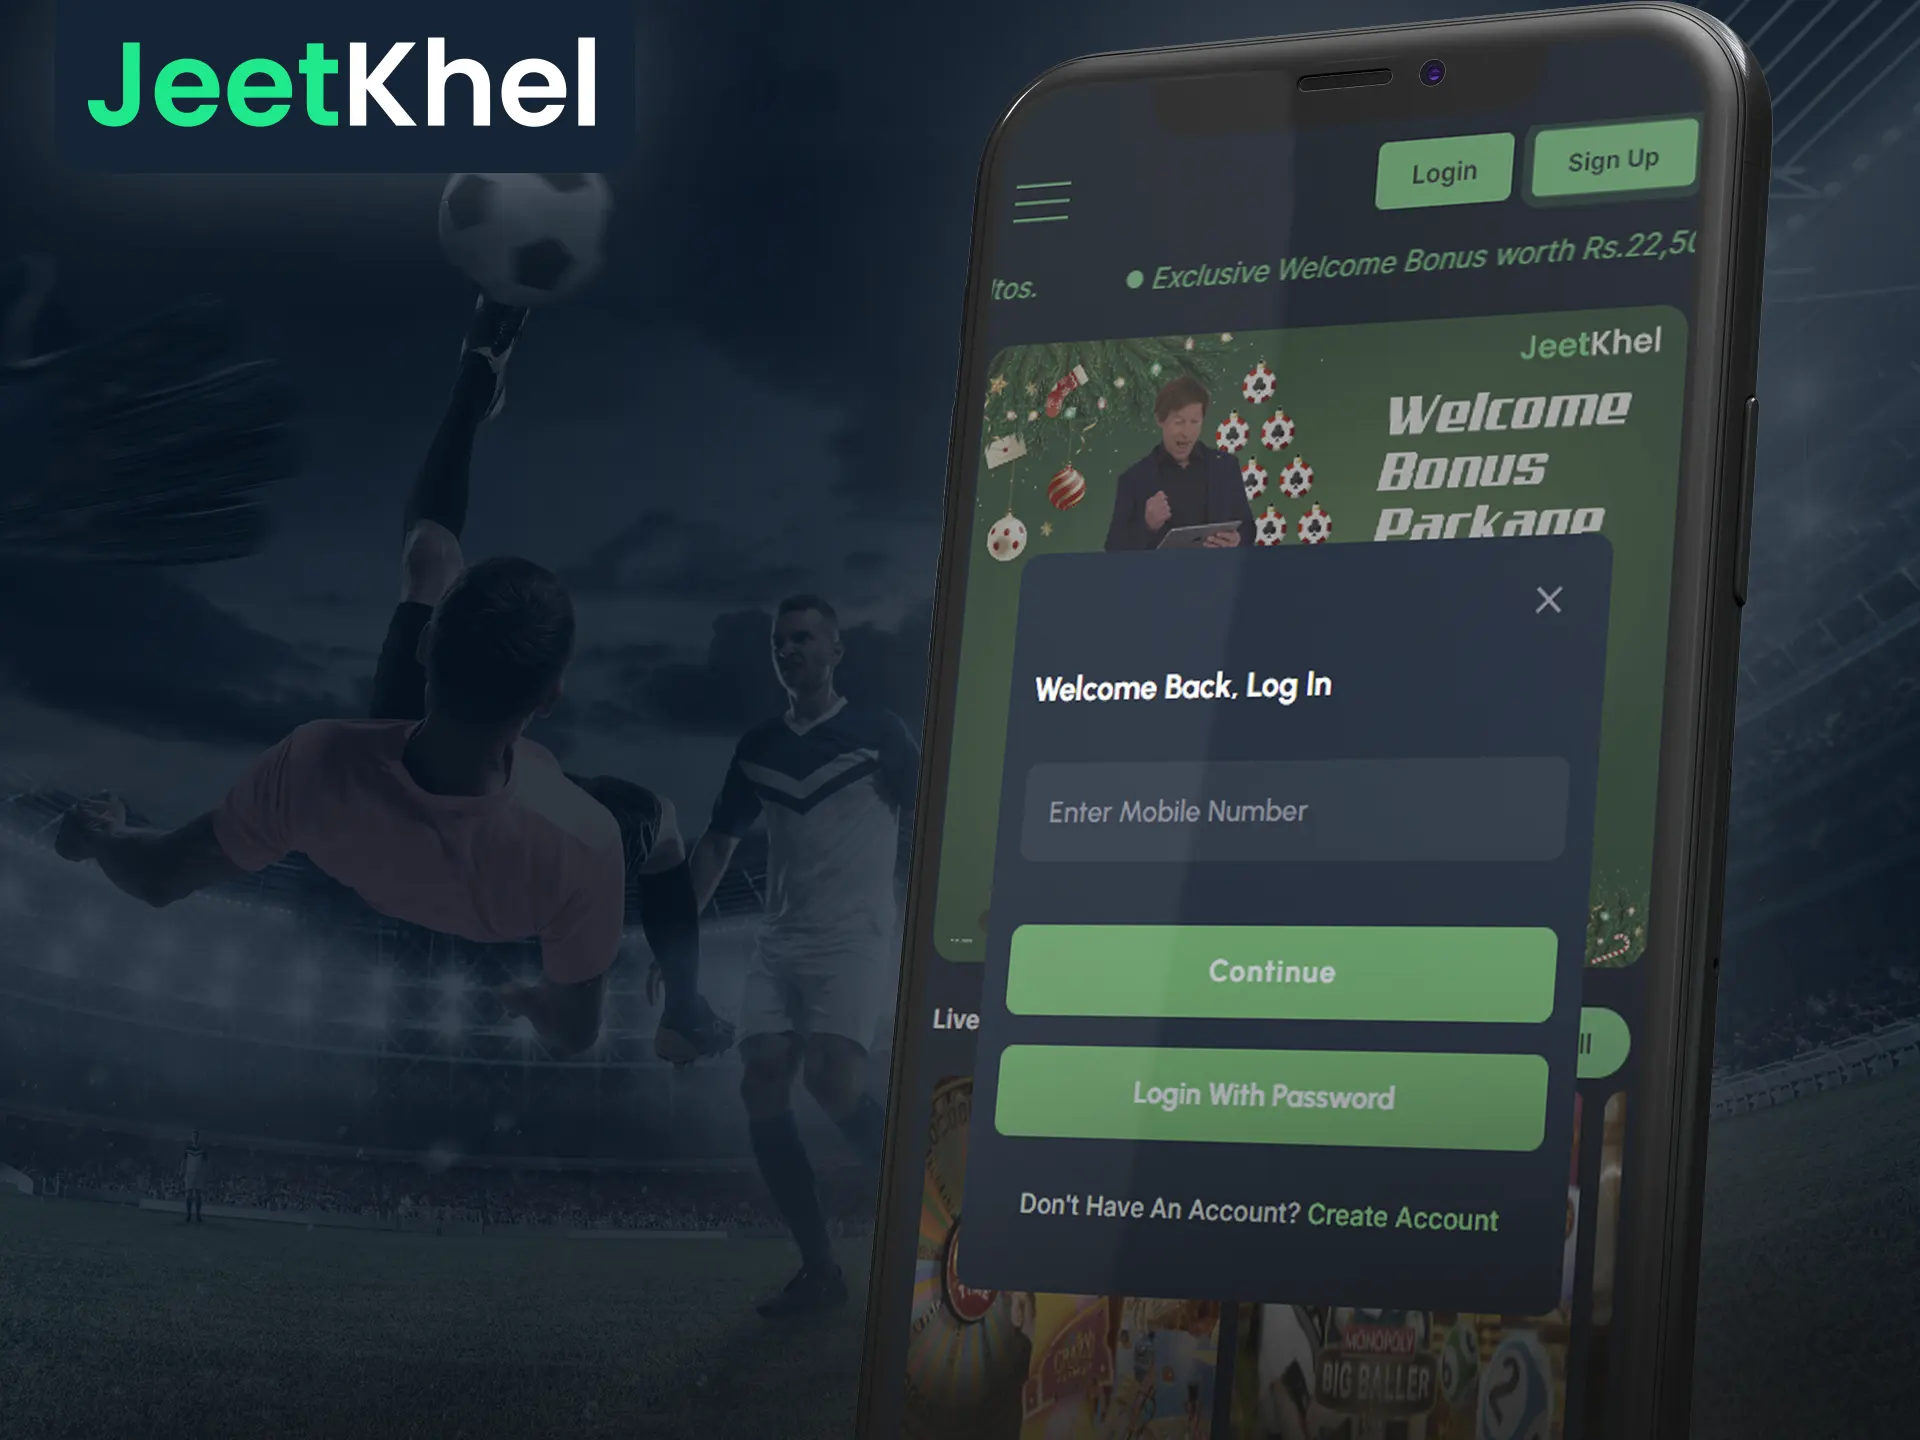 Log into your Jeetkhel account from your mobile device.